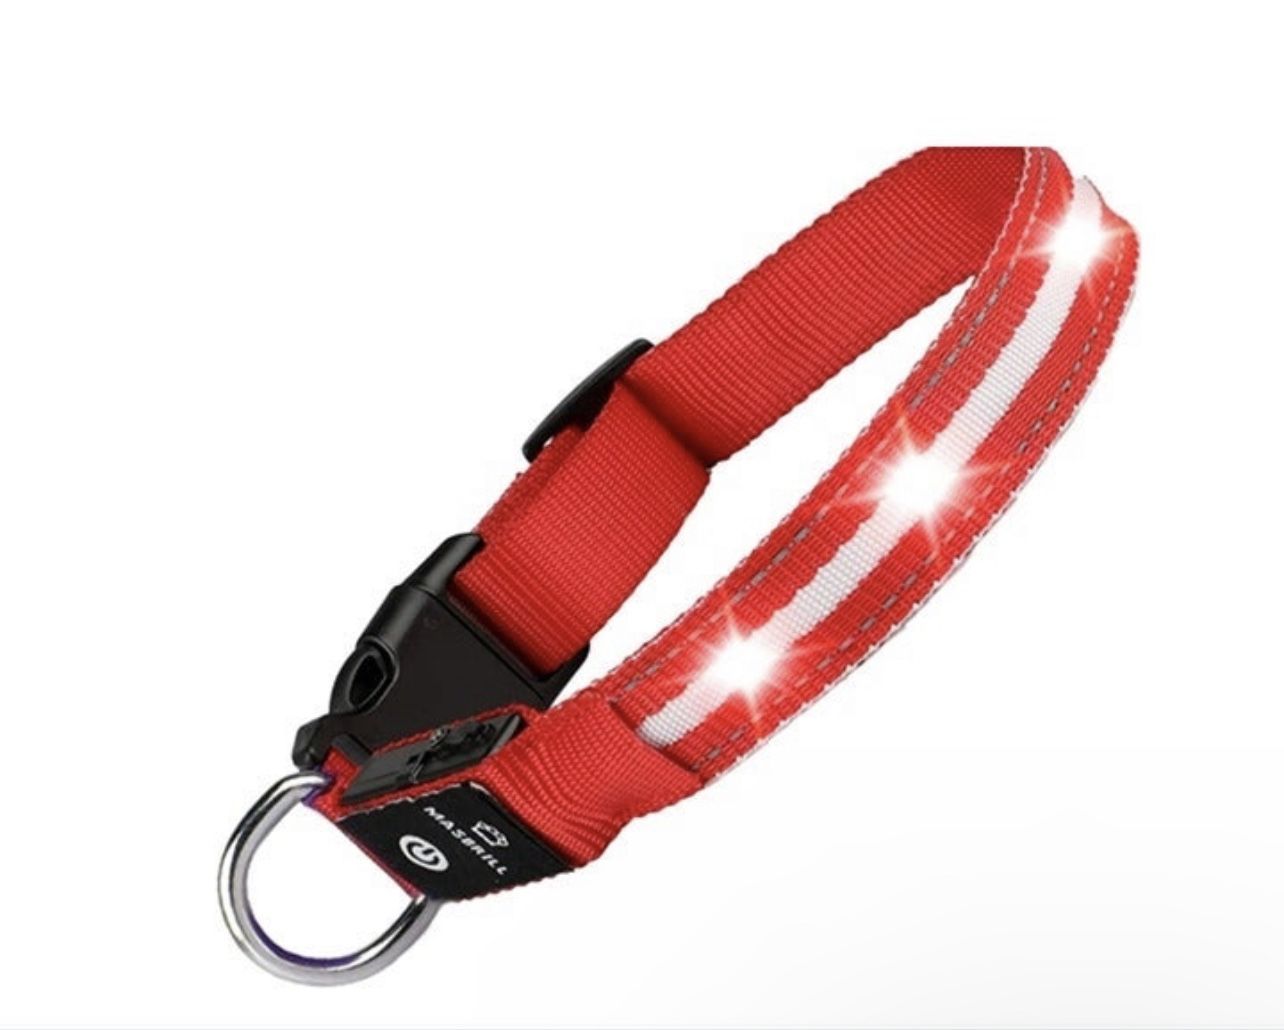 LED Dog Collar Light Up Flashing Rechargeable Waterproof Adjustable XL